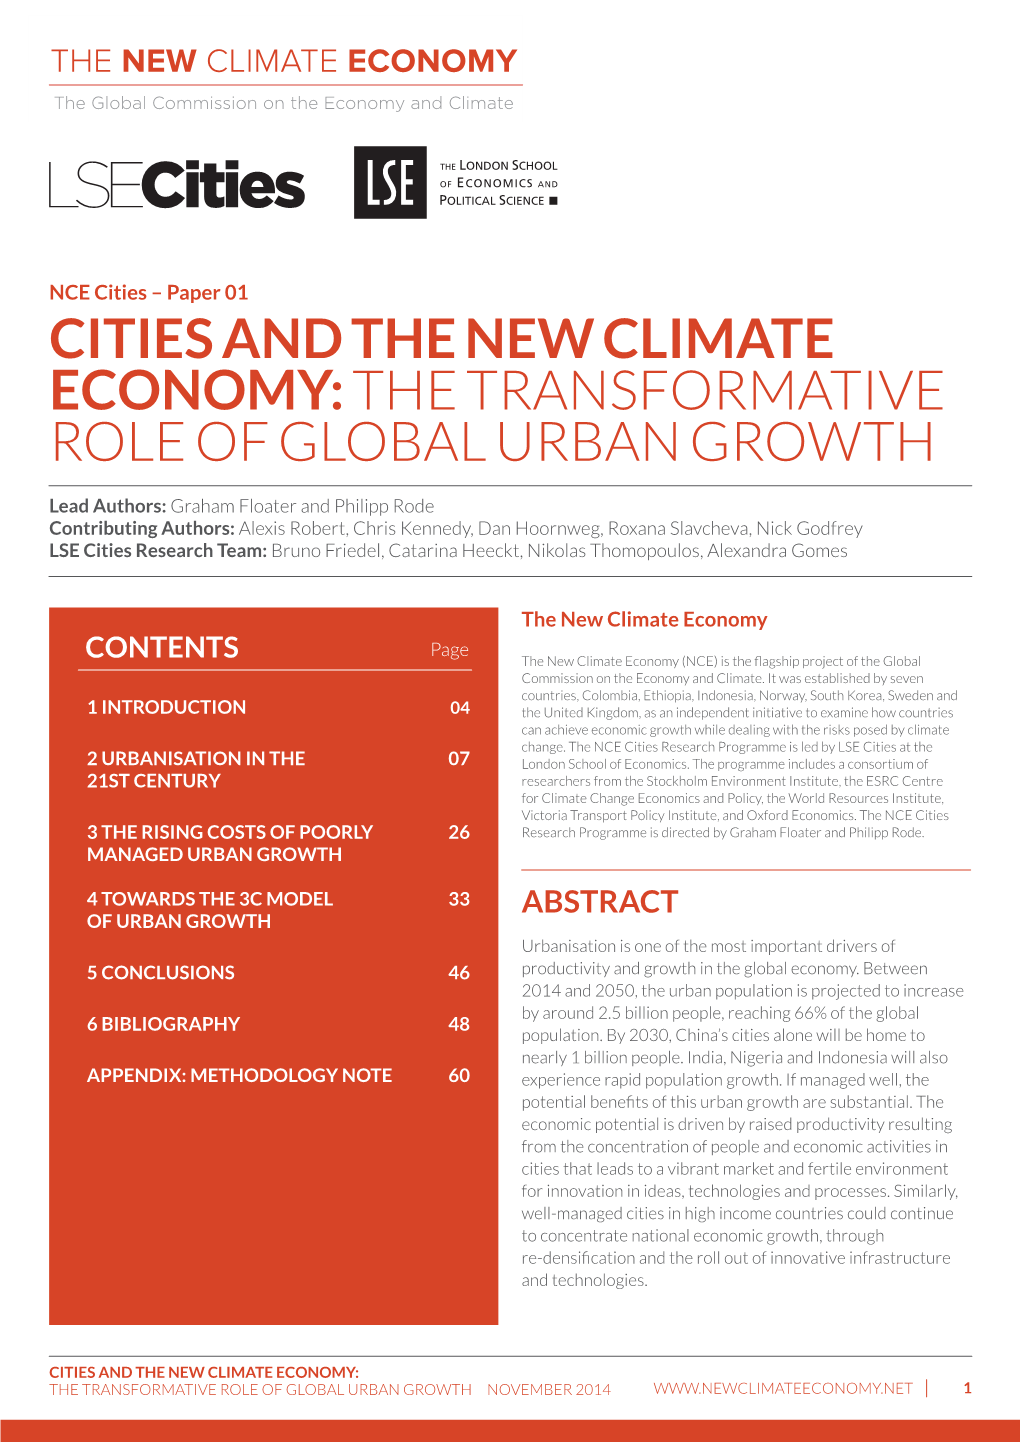 The Transformative Role of Global Urban Growth